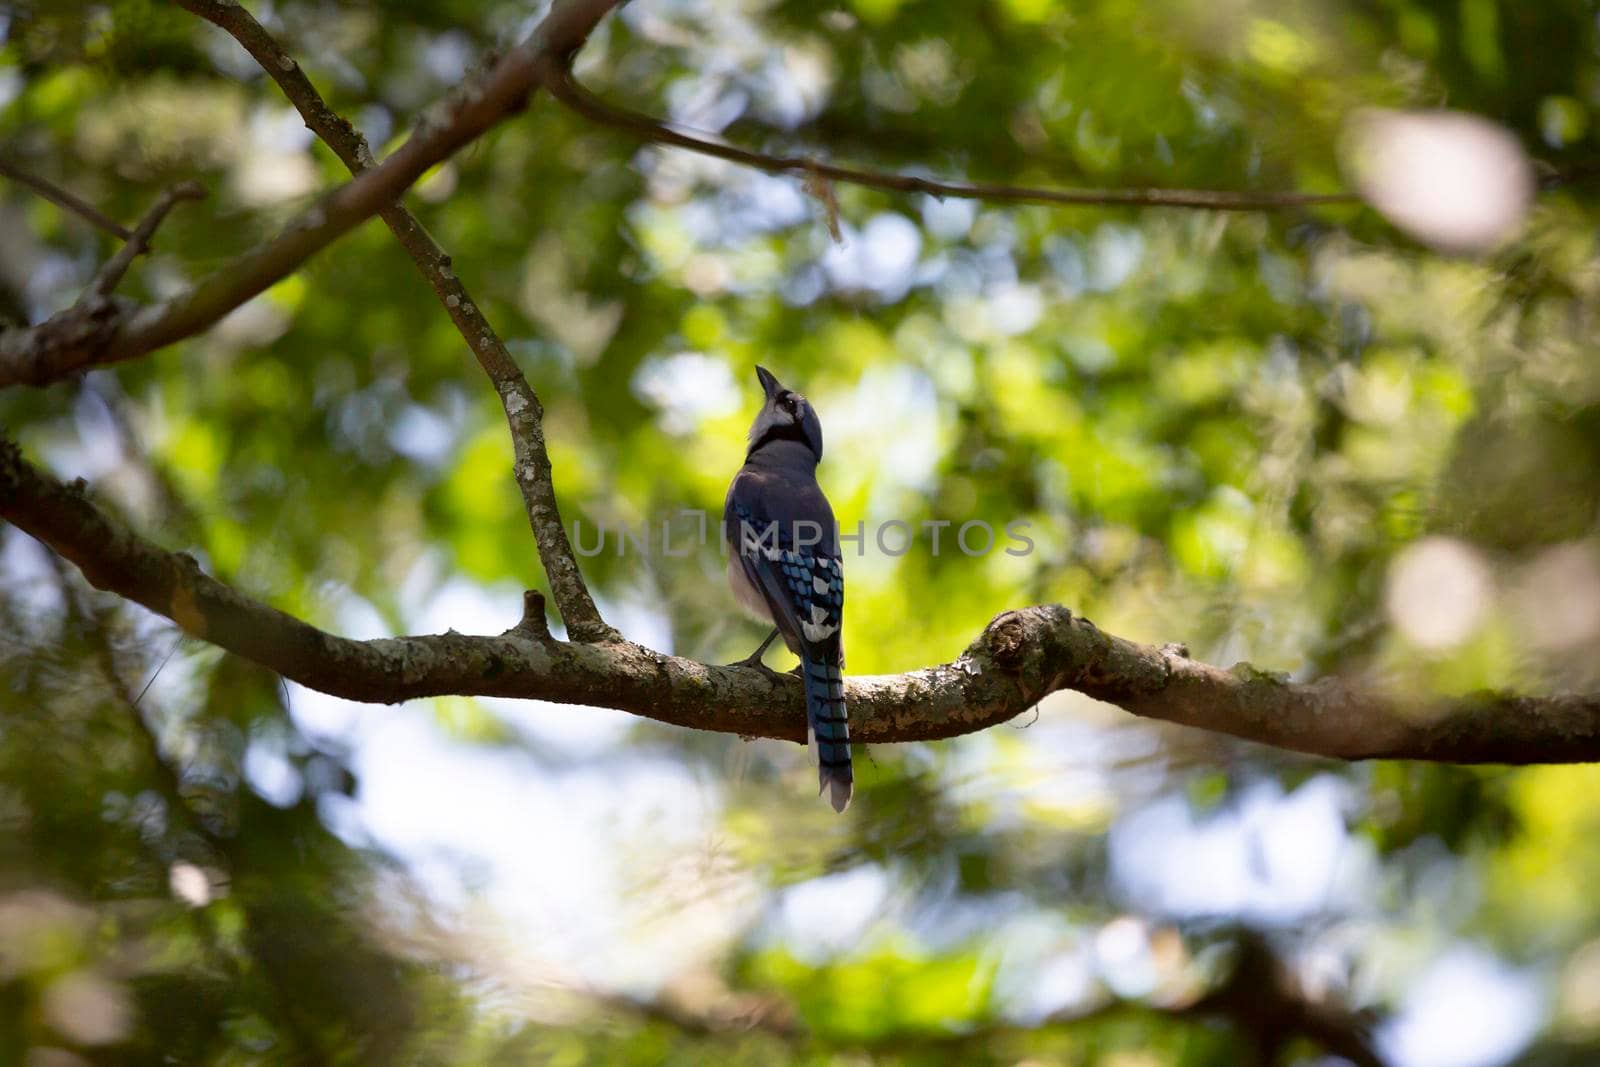 Blue jay (Cyanocitta cristata) looking up majestically from its perch on a tree branch